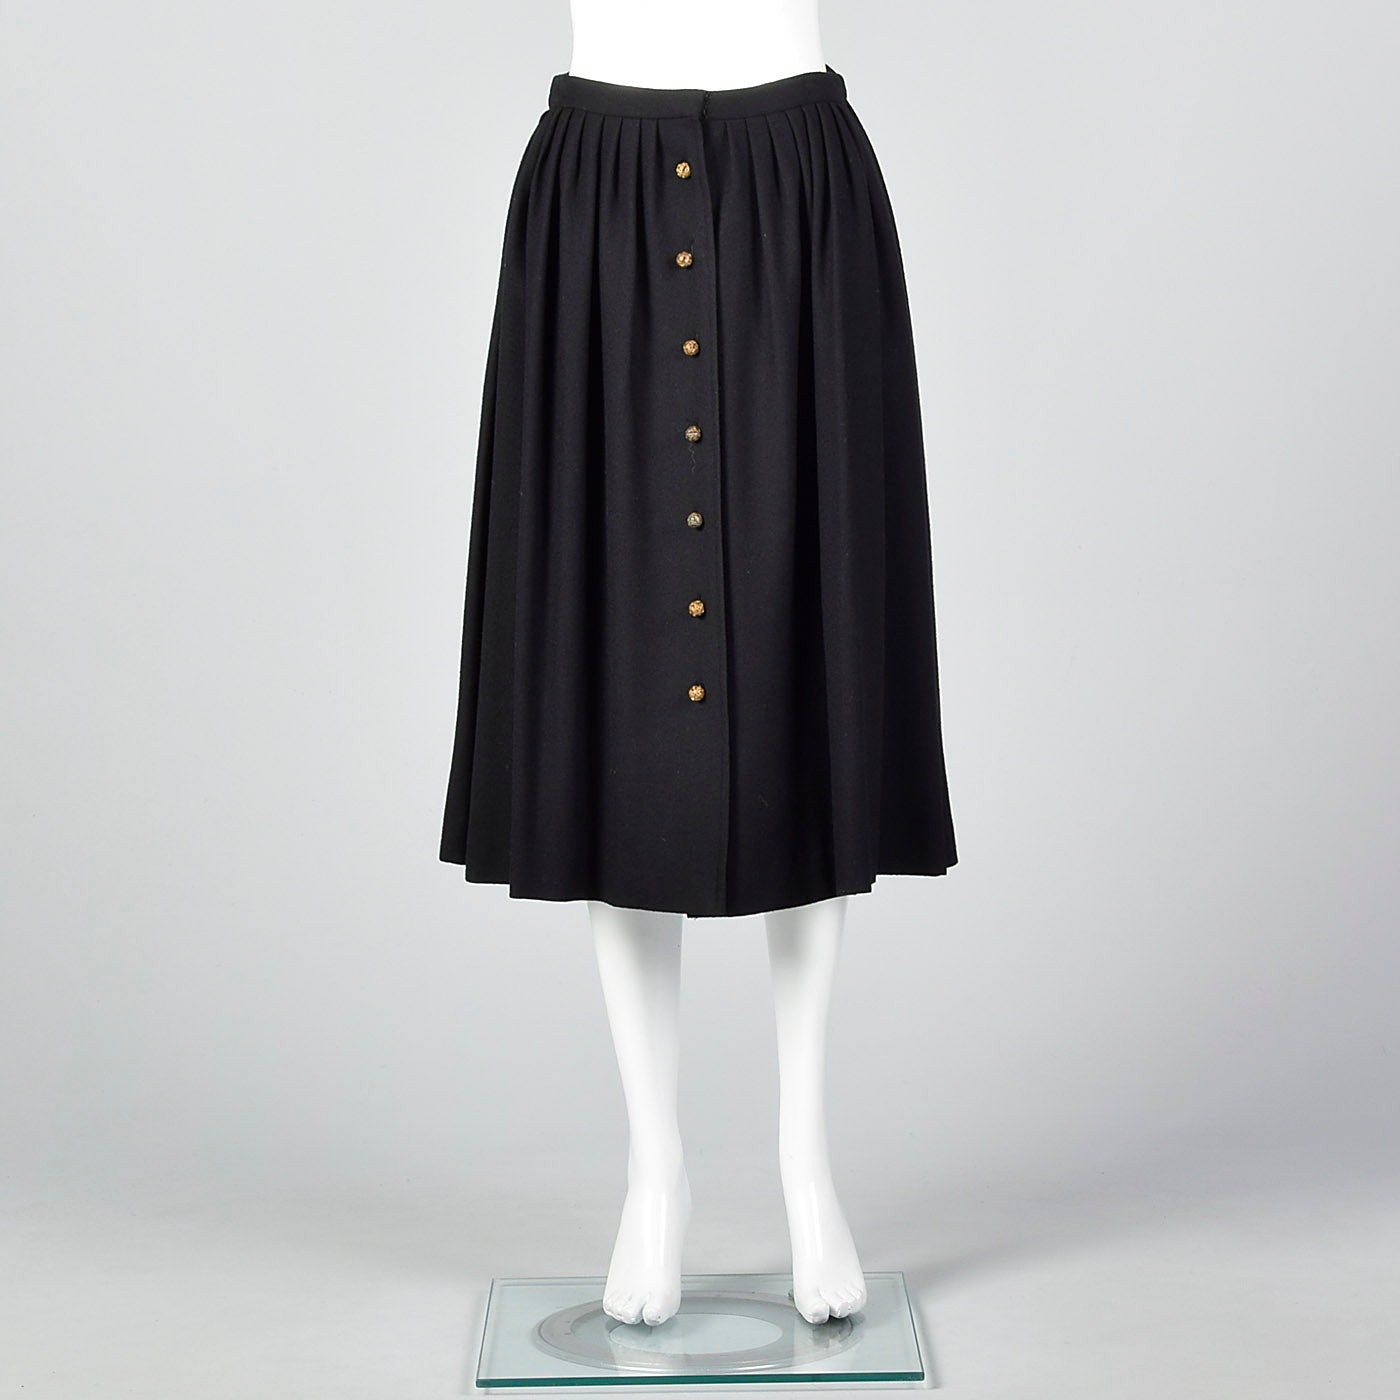 1970s Chloe Timeless  Black Wool Skirt with Gold Buttons, Karl Lagerfeld era